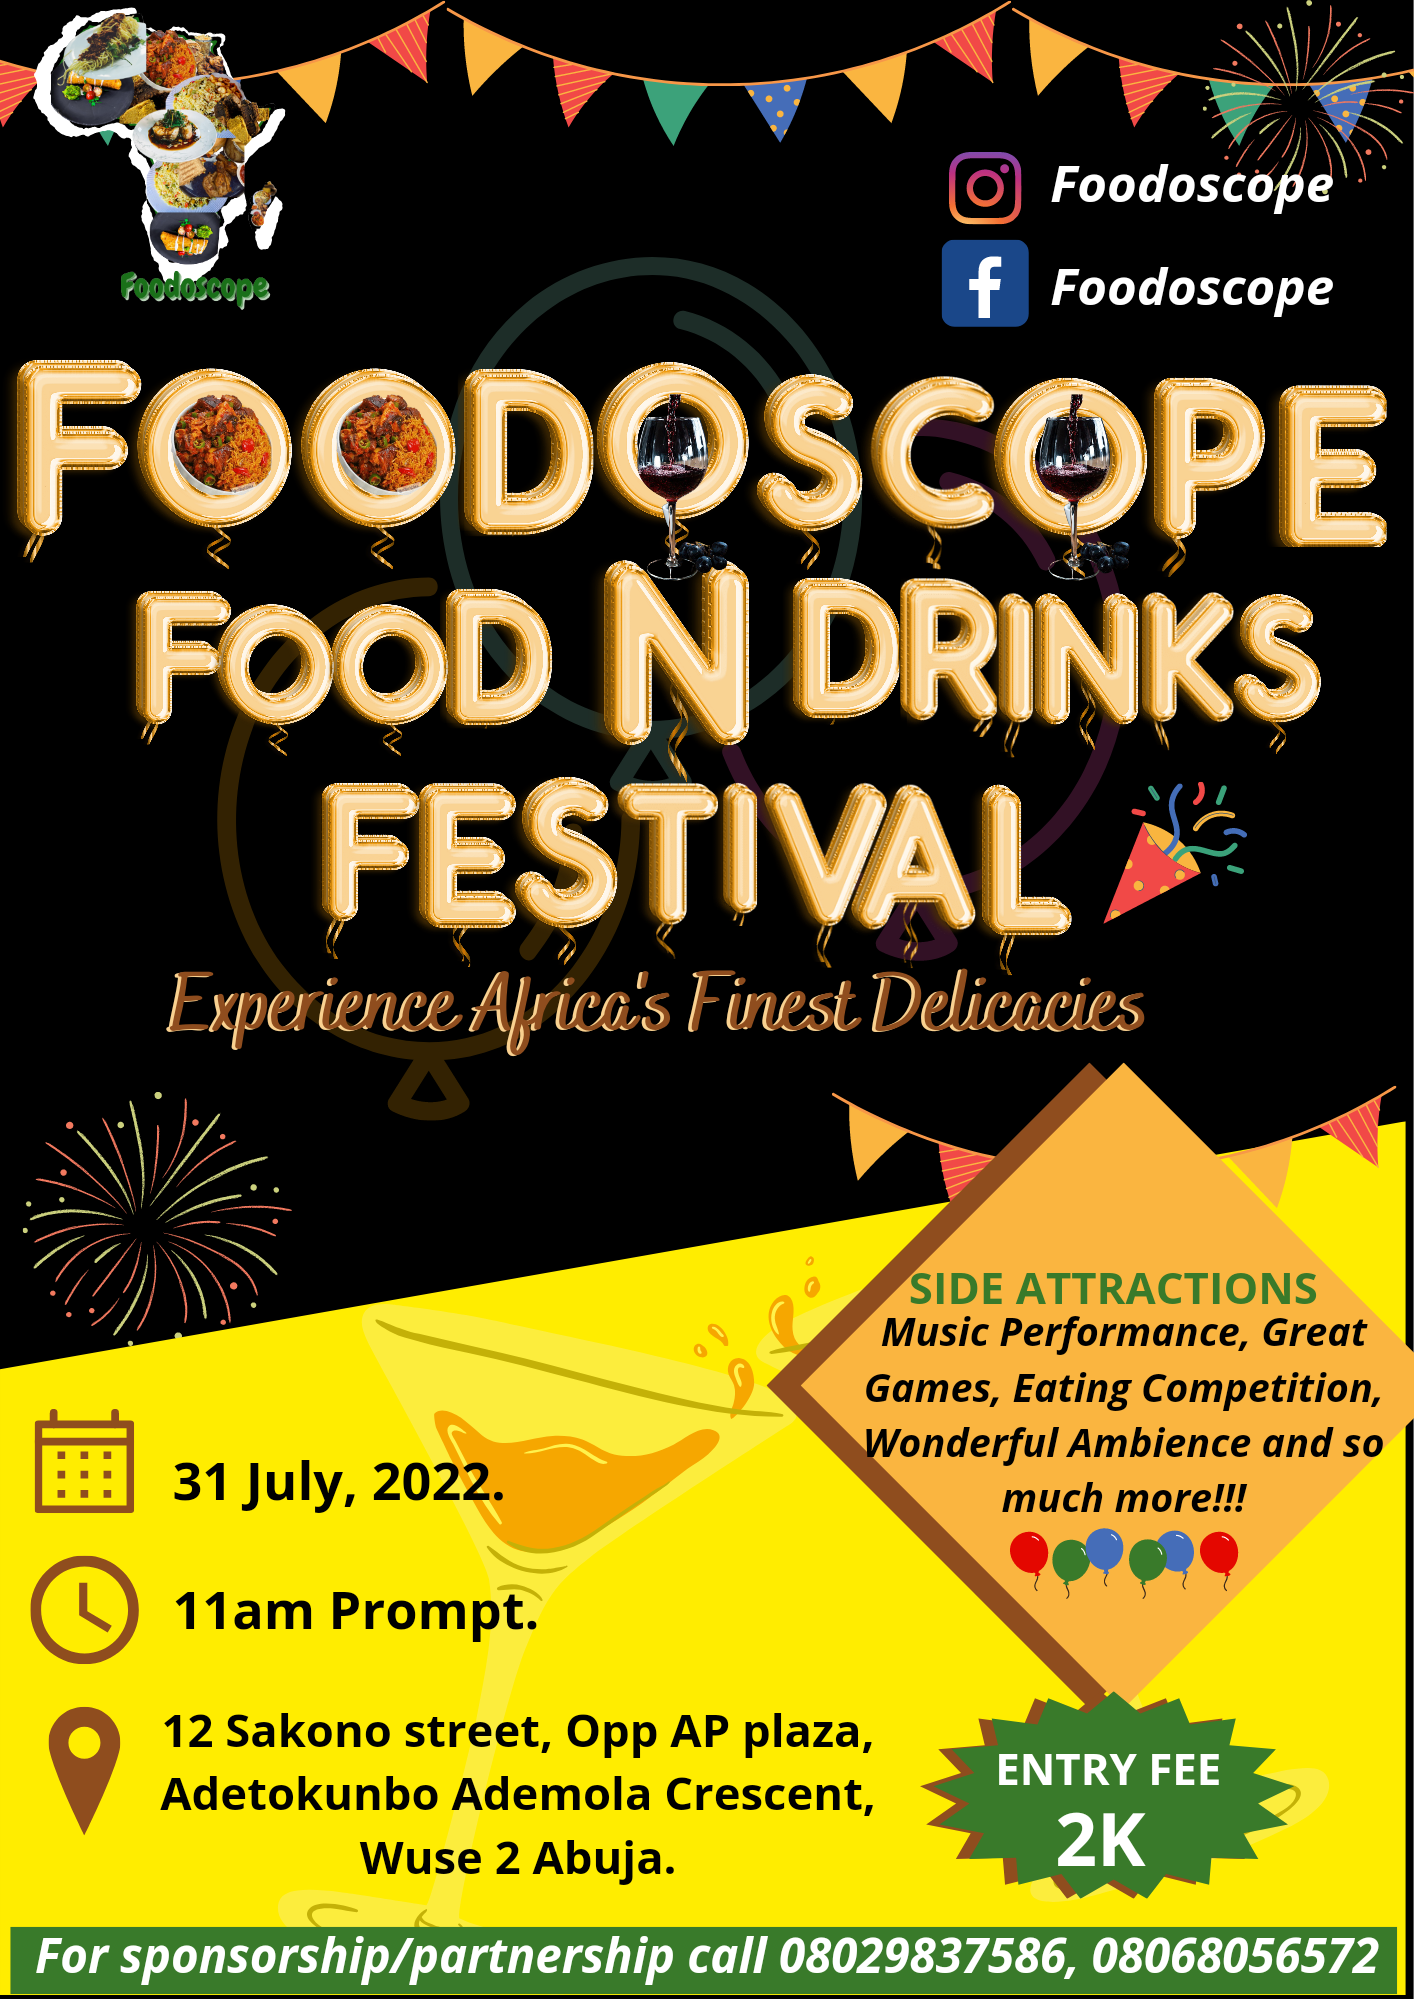 Foodoscope Post free event in Nigeria using tickethub.ng, buy and sell tickets to event